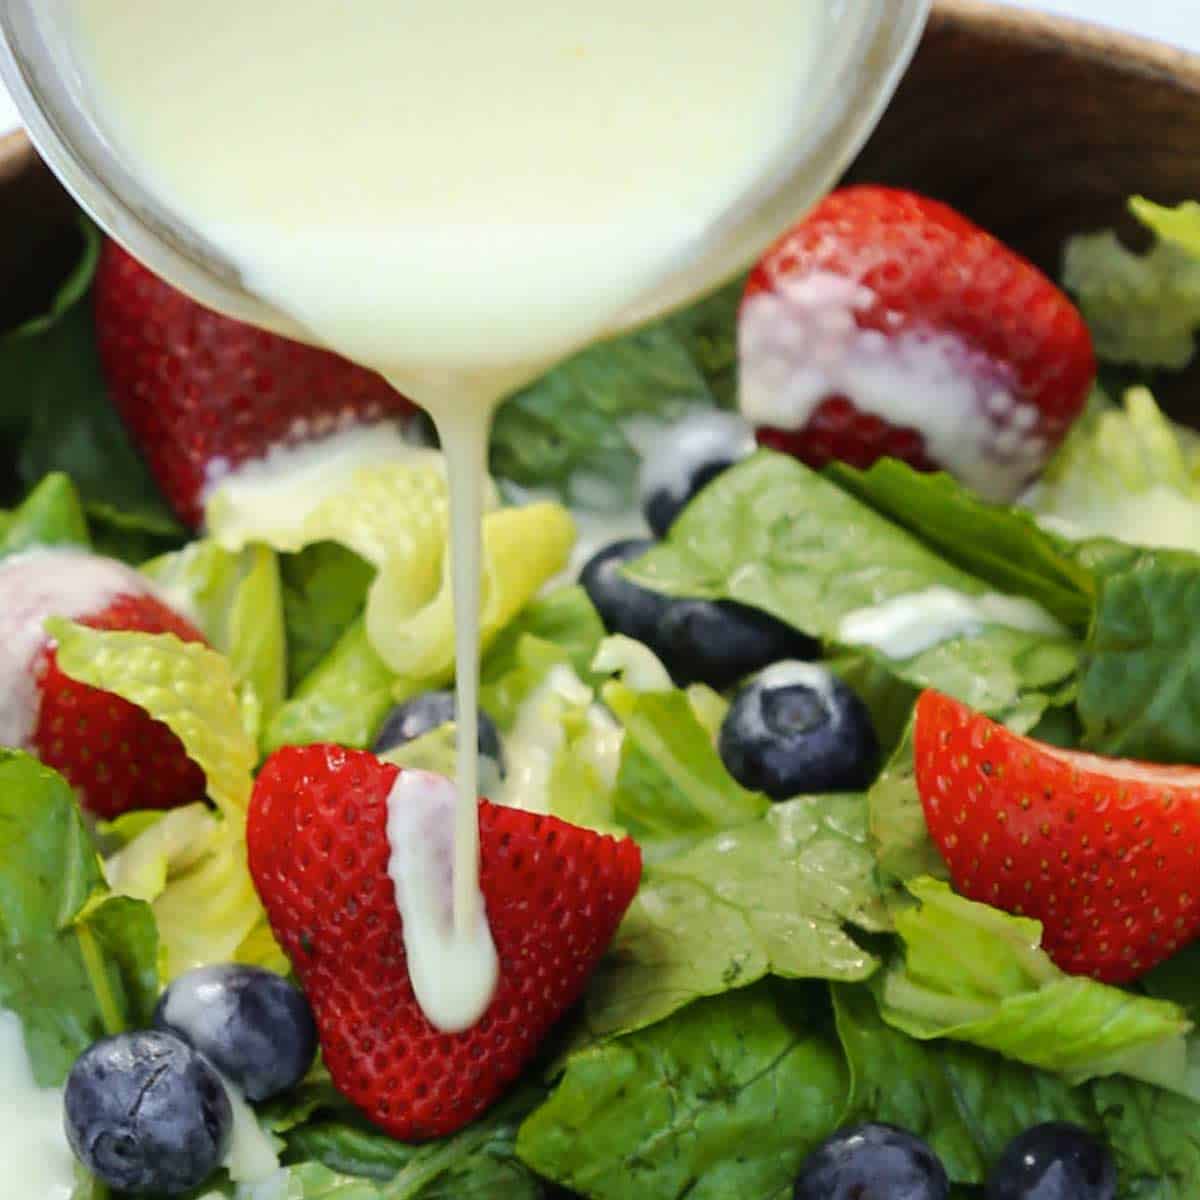 Lemon salad dressing being poured over a fresh green salad with strawberries and blueberries